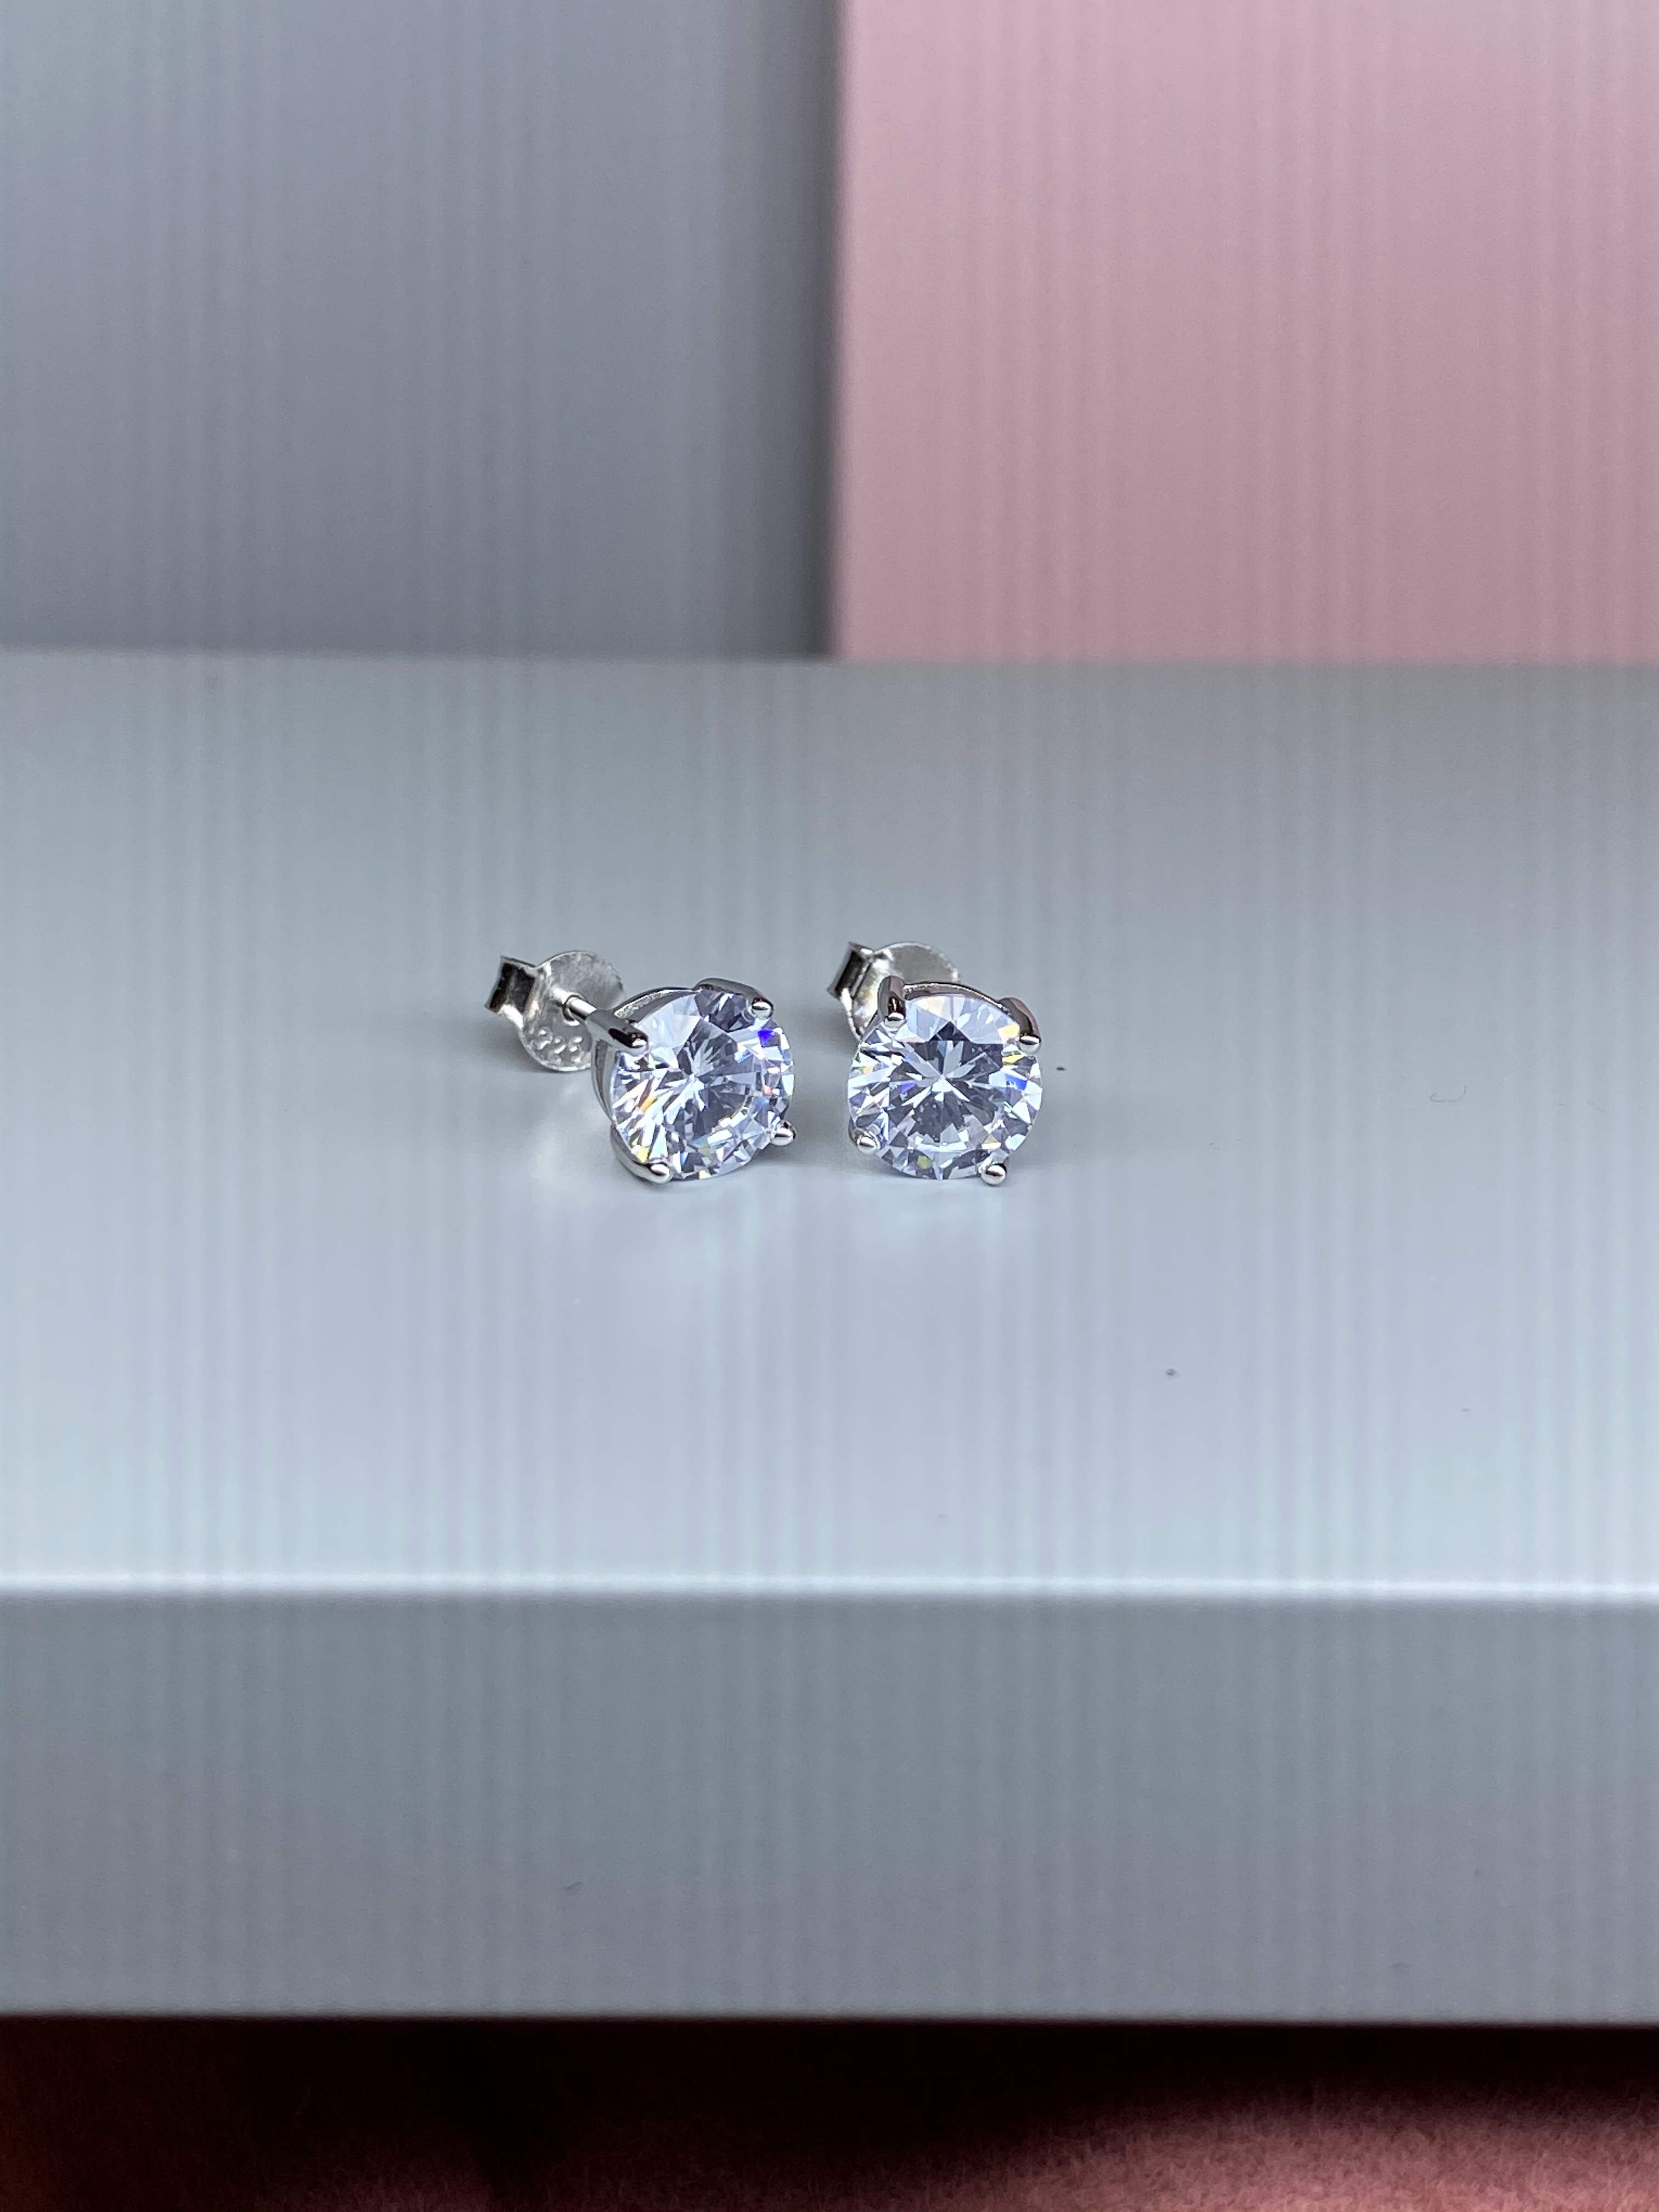 Sterling Silver Round CZ Earrings - 7mm - Hallmark Jewellers Formby & The Jewellers Bench Widnes